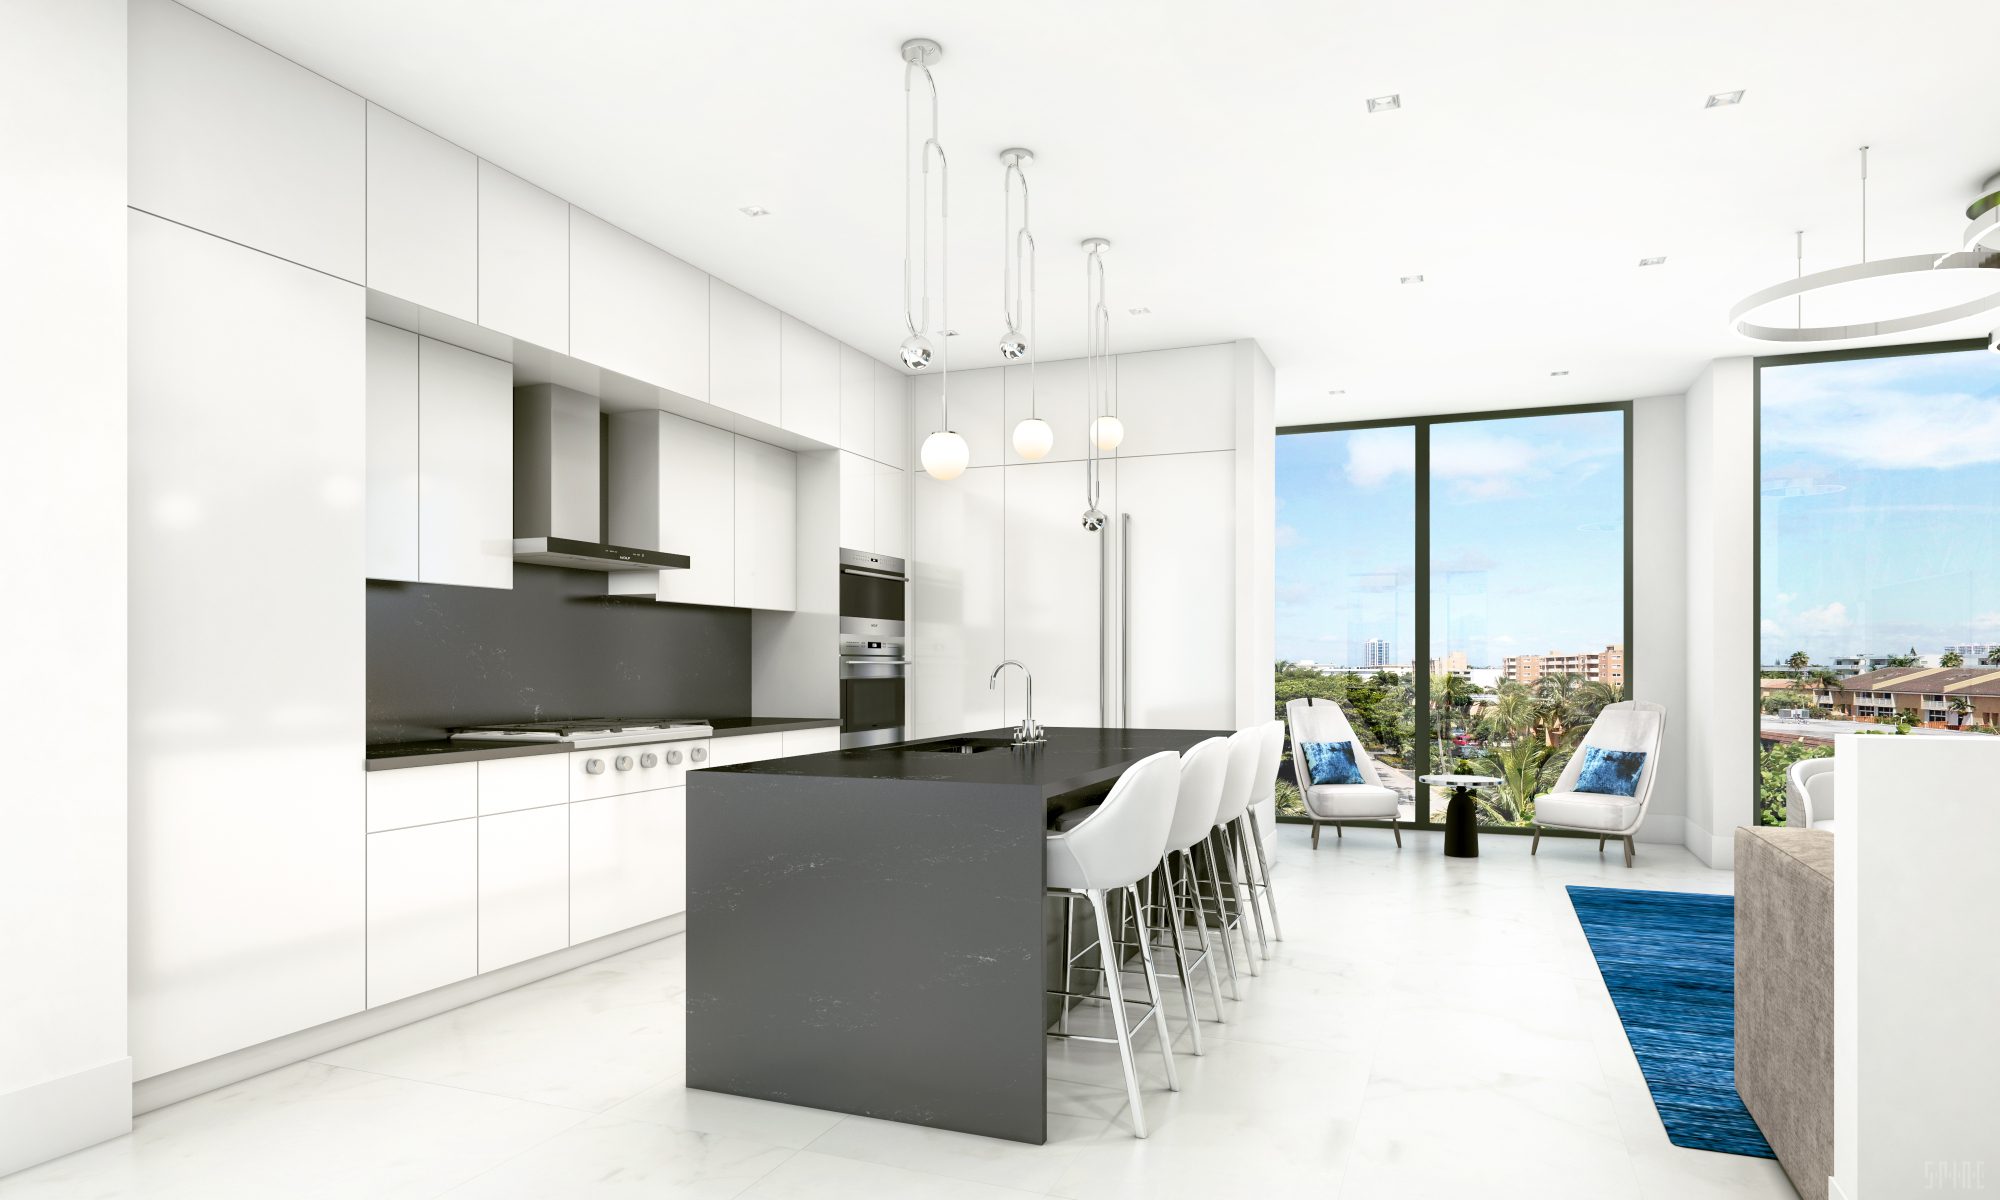 Aura Kitchen Koya Bay Rendering of a kitchen with furniture and appliances as well as large windows